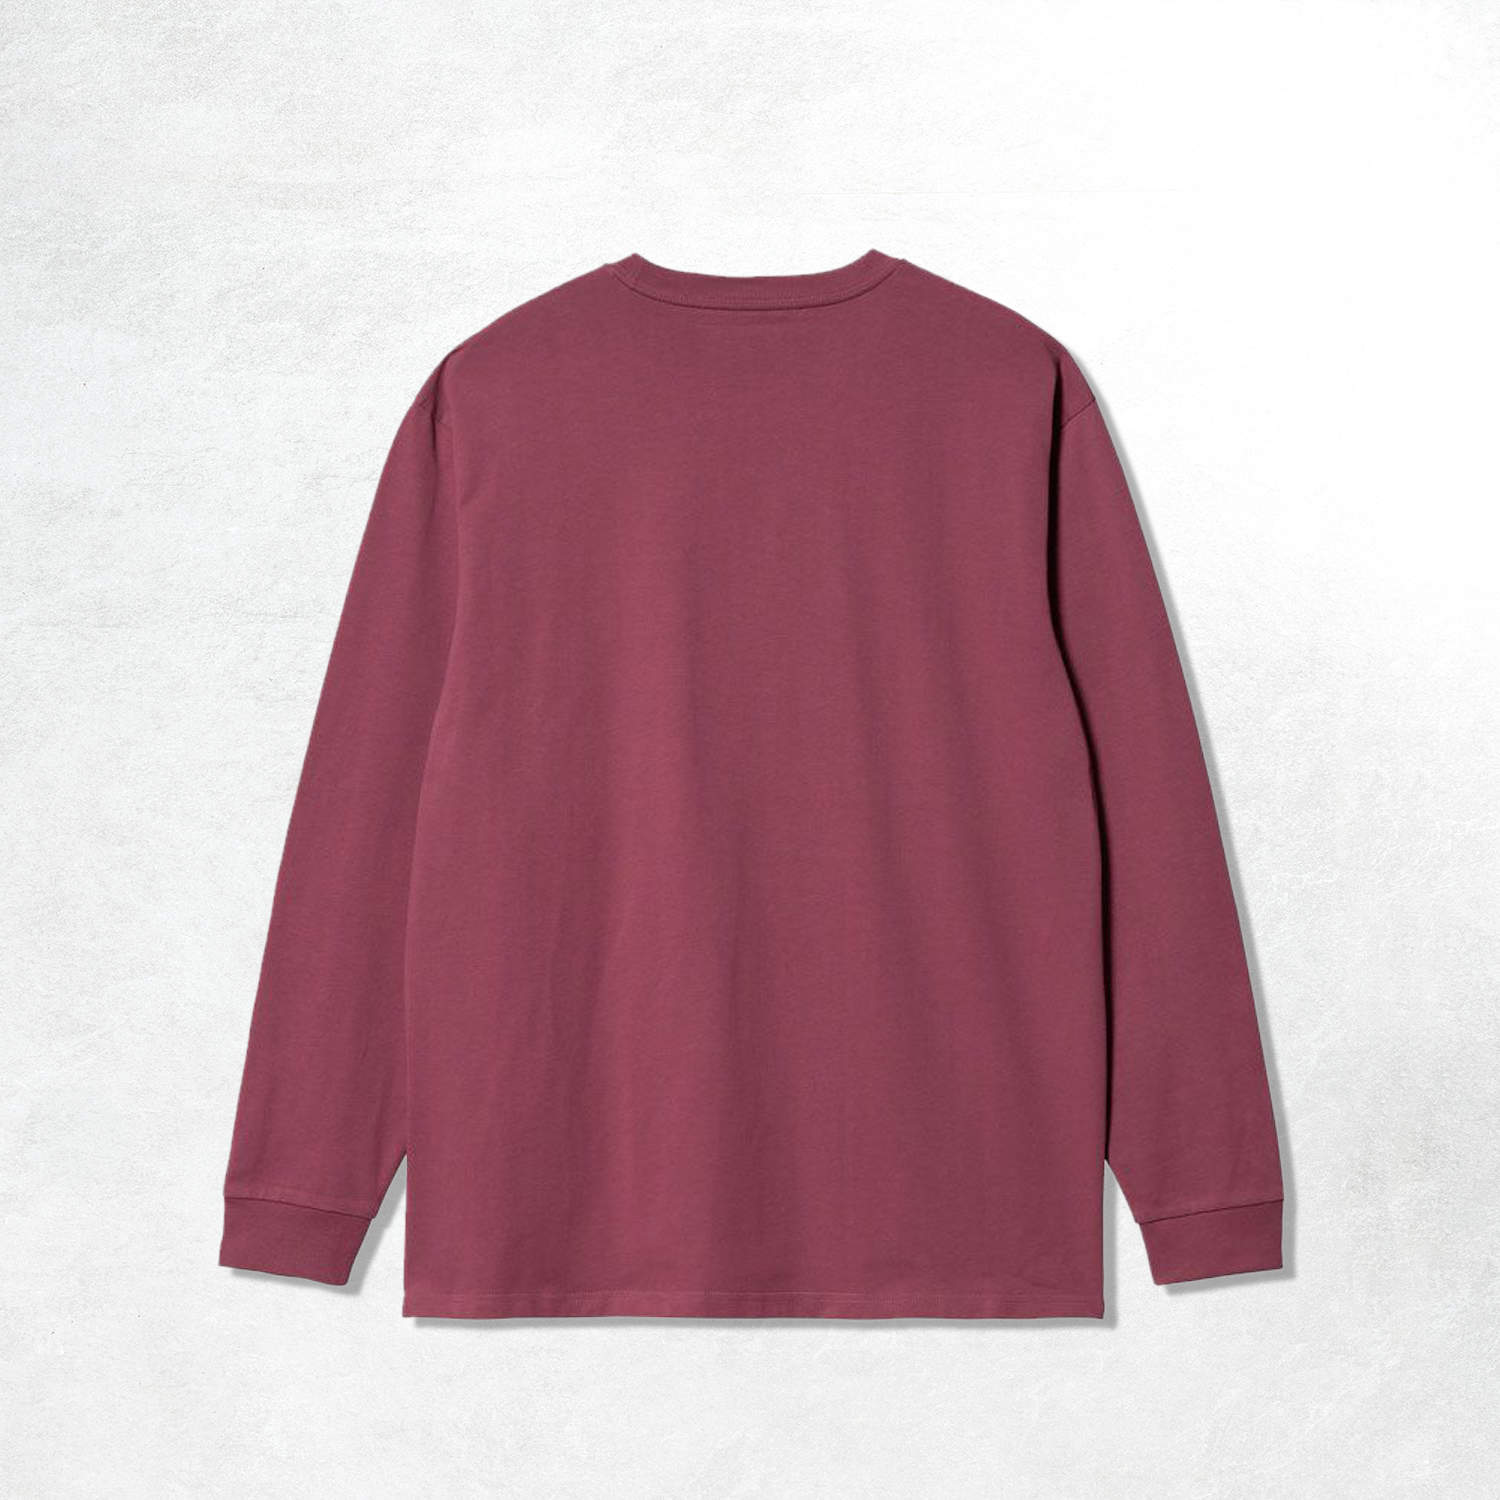 Carhartt WIP L/S Chase T-Shirt: Punch/Gold.2